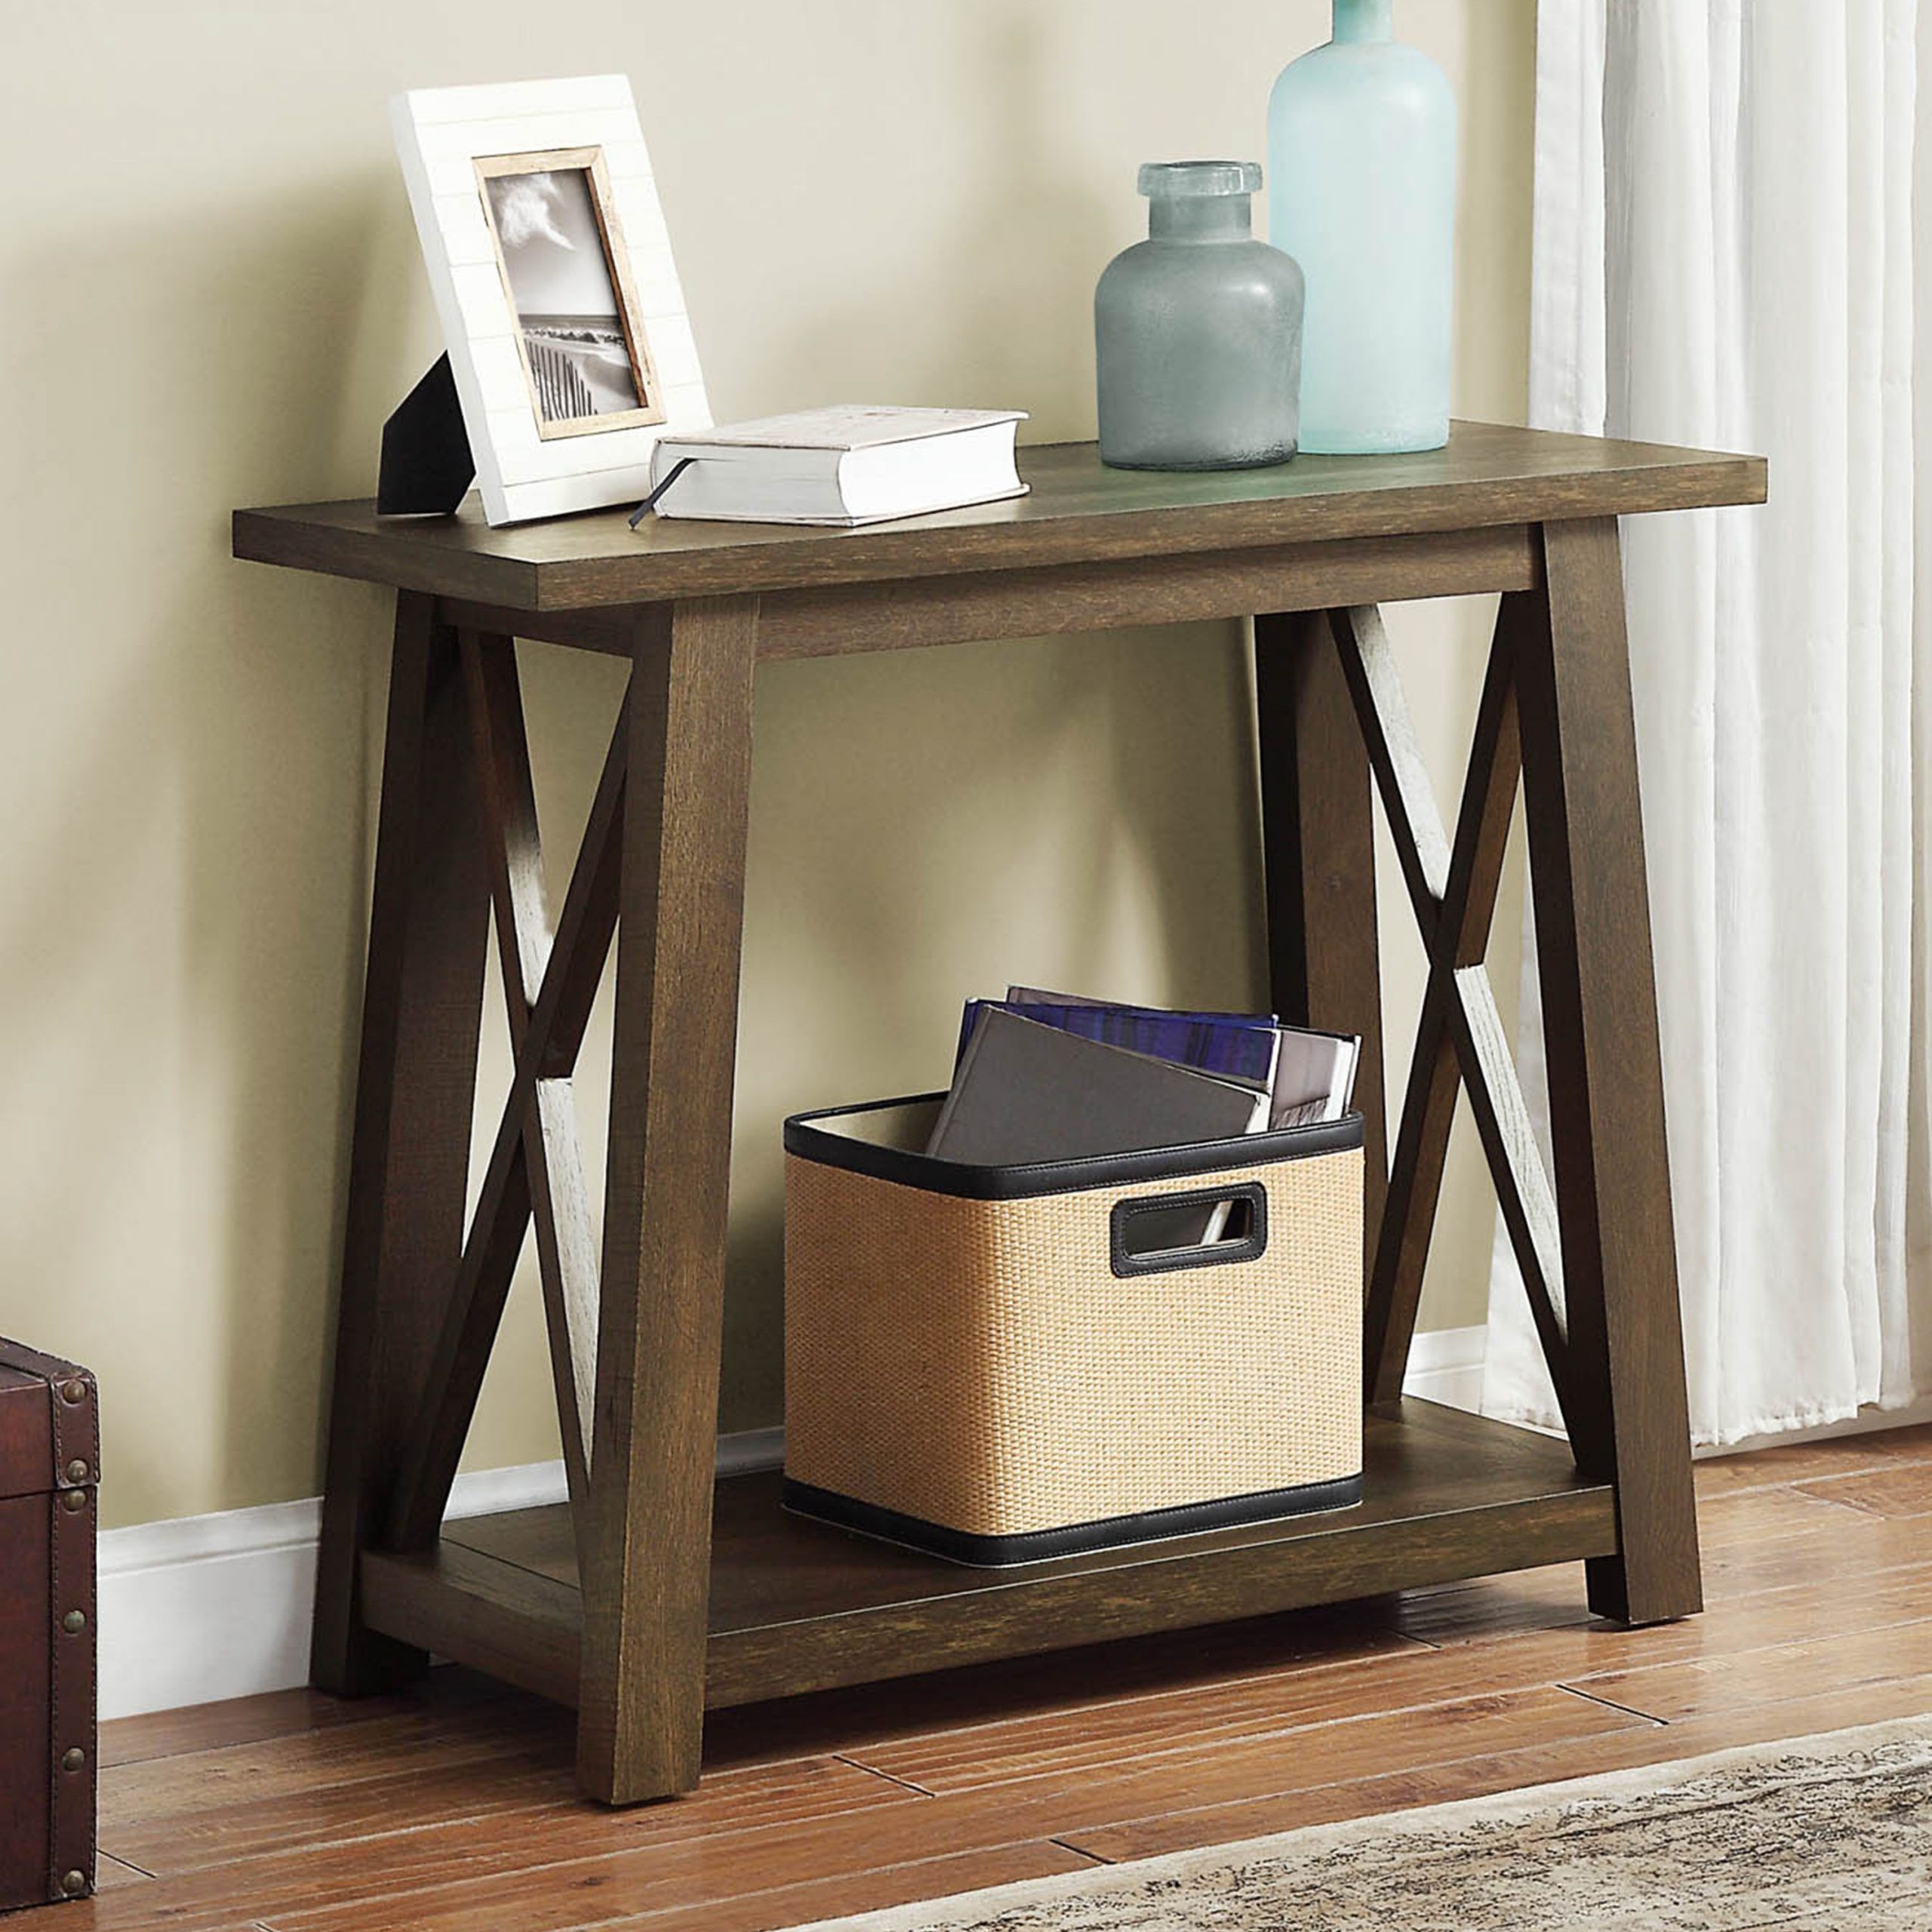 Better Homes & Gardens Granary Modern Farmhouse 36" Console Table Inside Square Modern Console Tables (View 9 of 20)